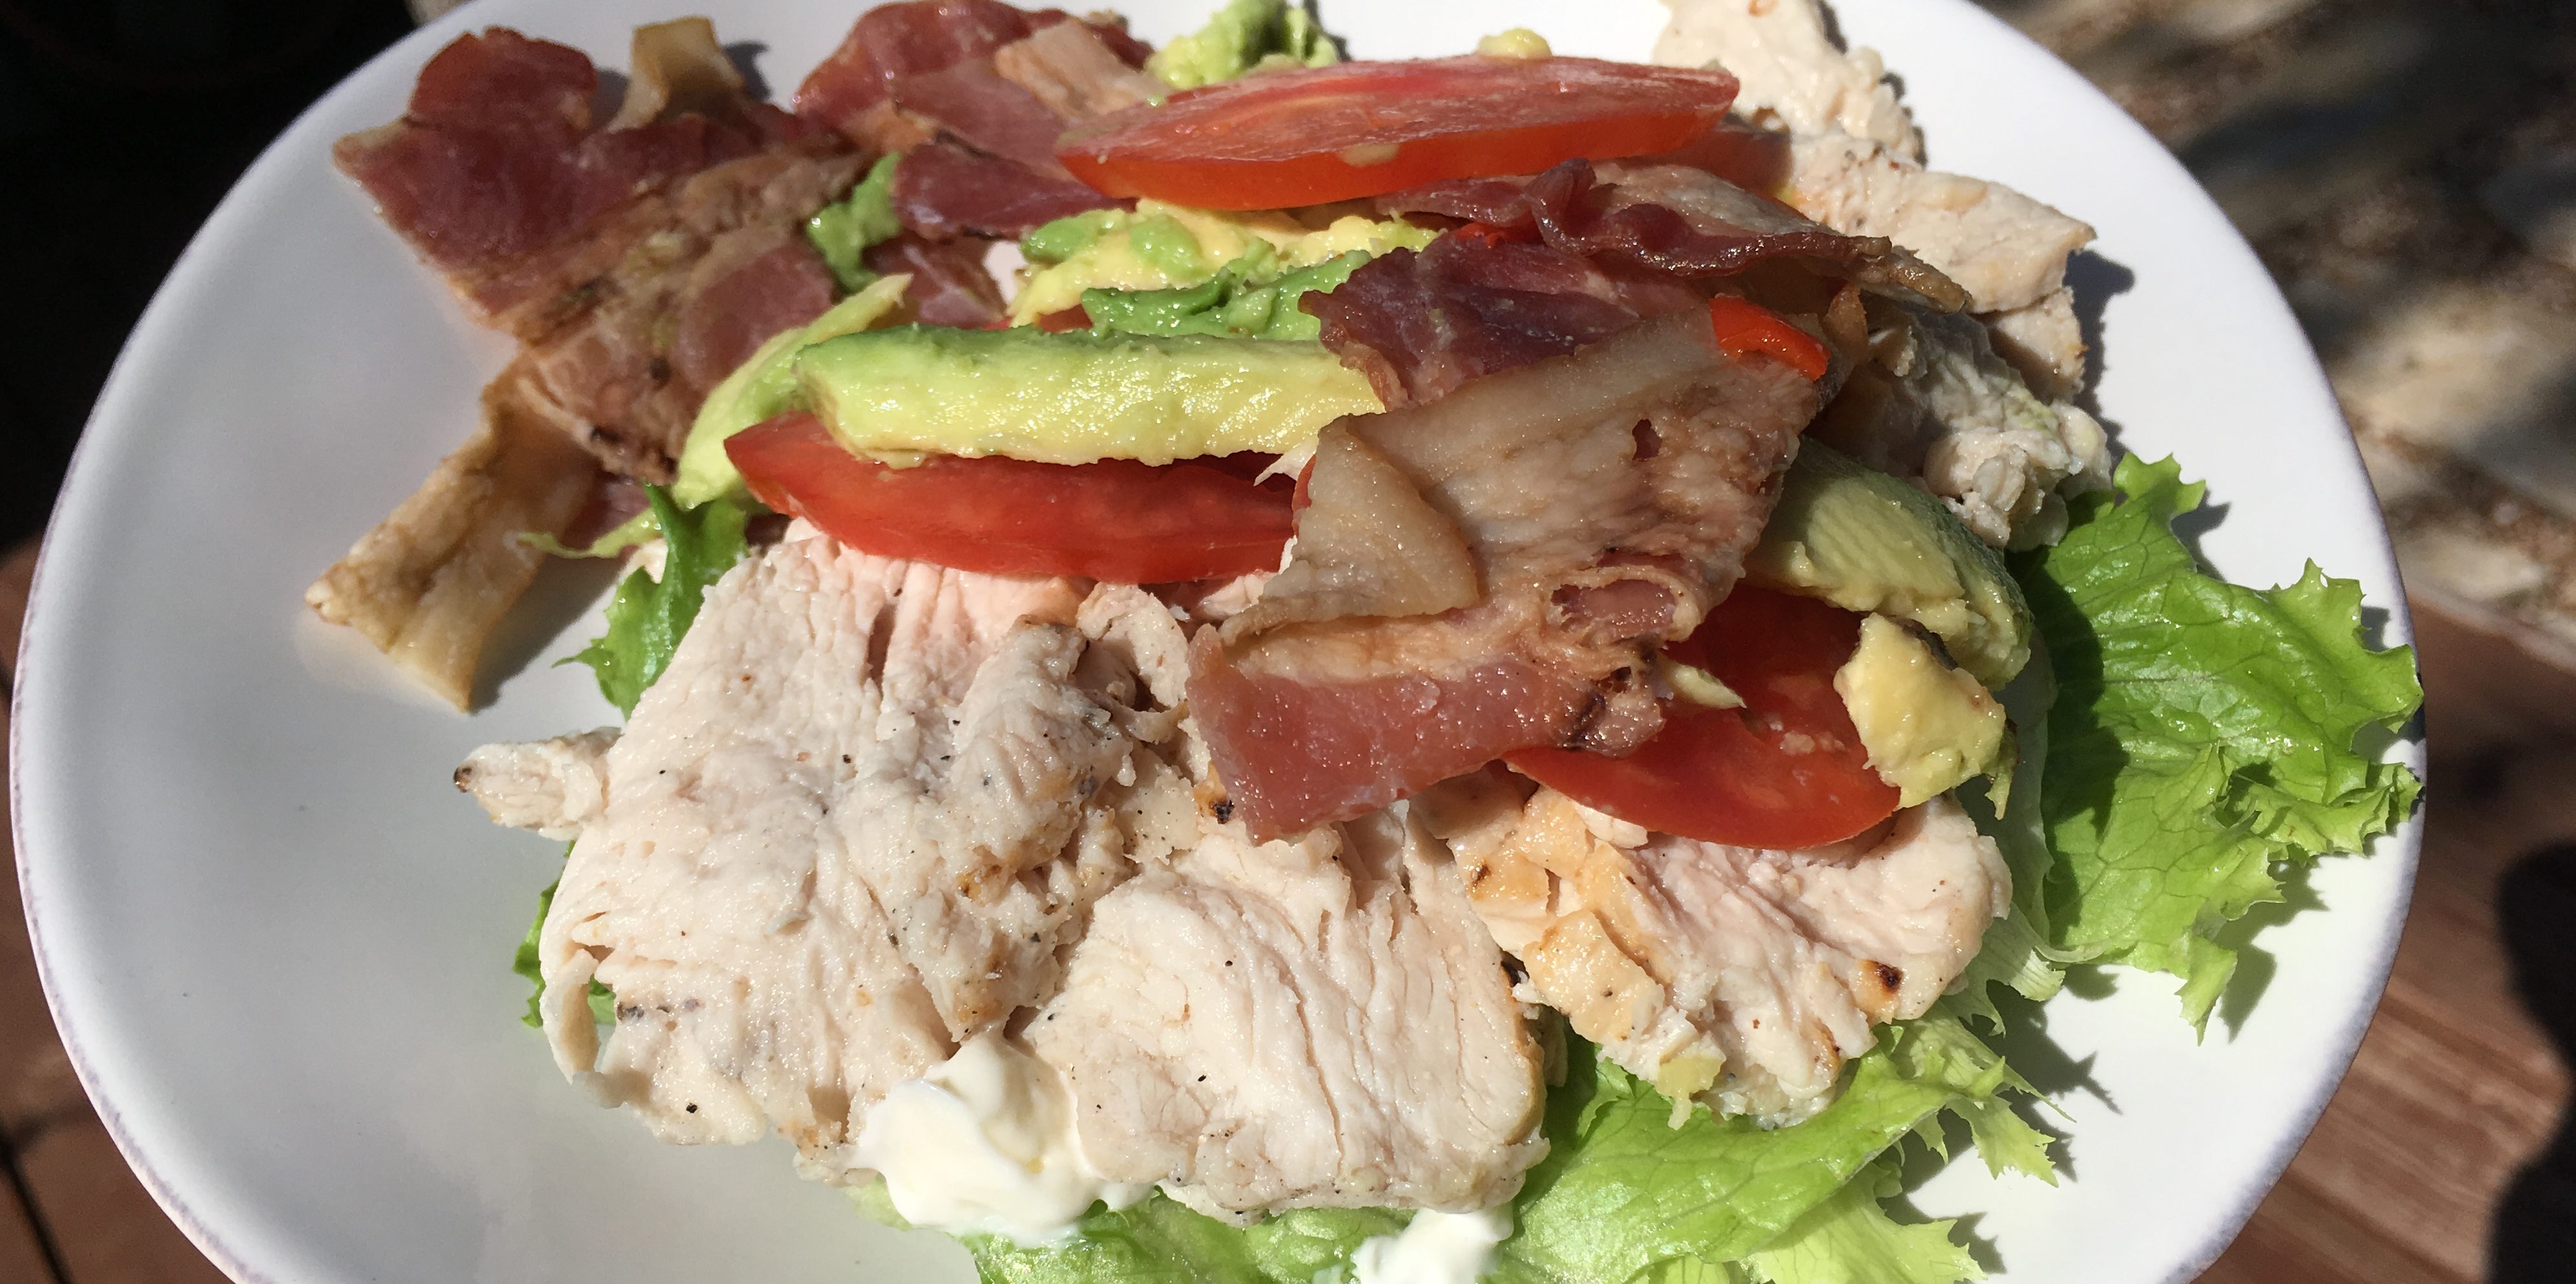 Low Carb Panera Roasted Turkey and Avocado BLT Plated Mr. SkinnyPants